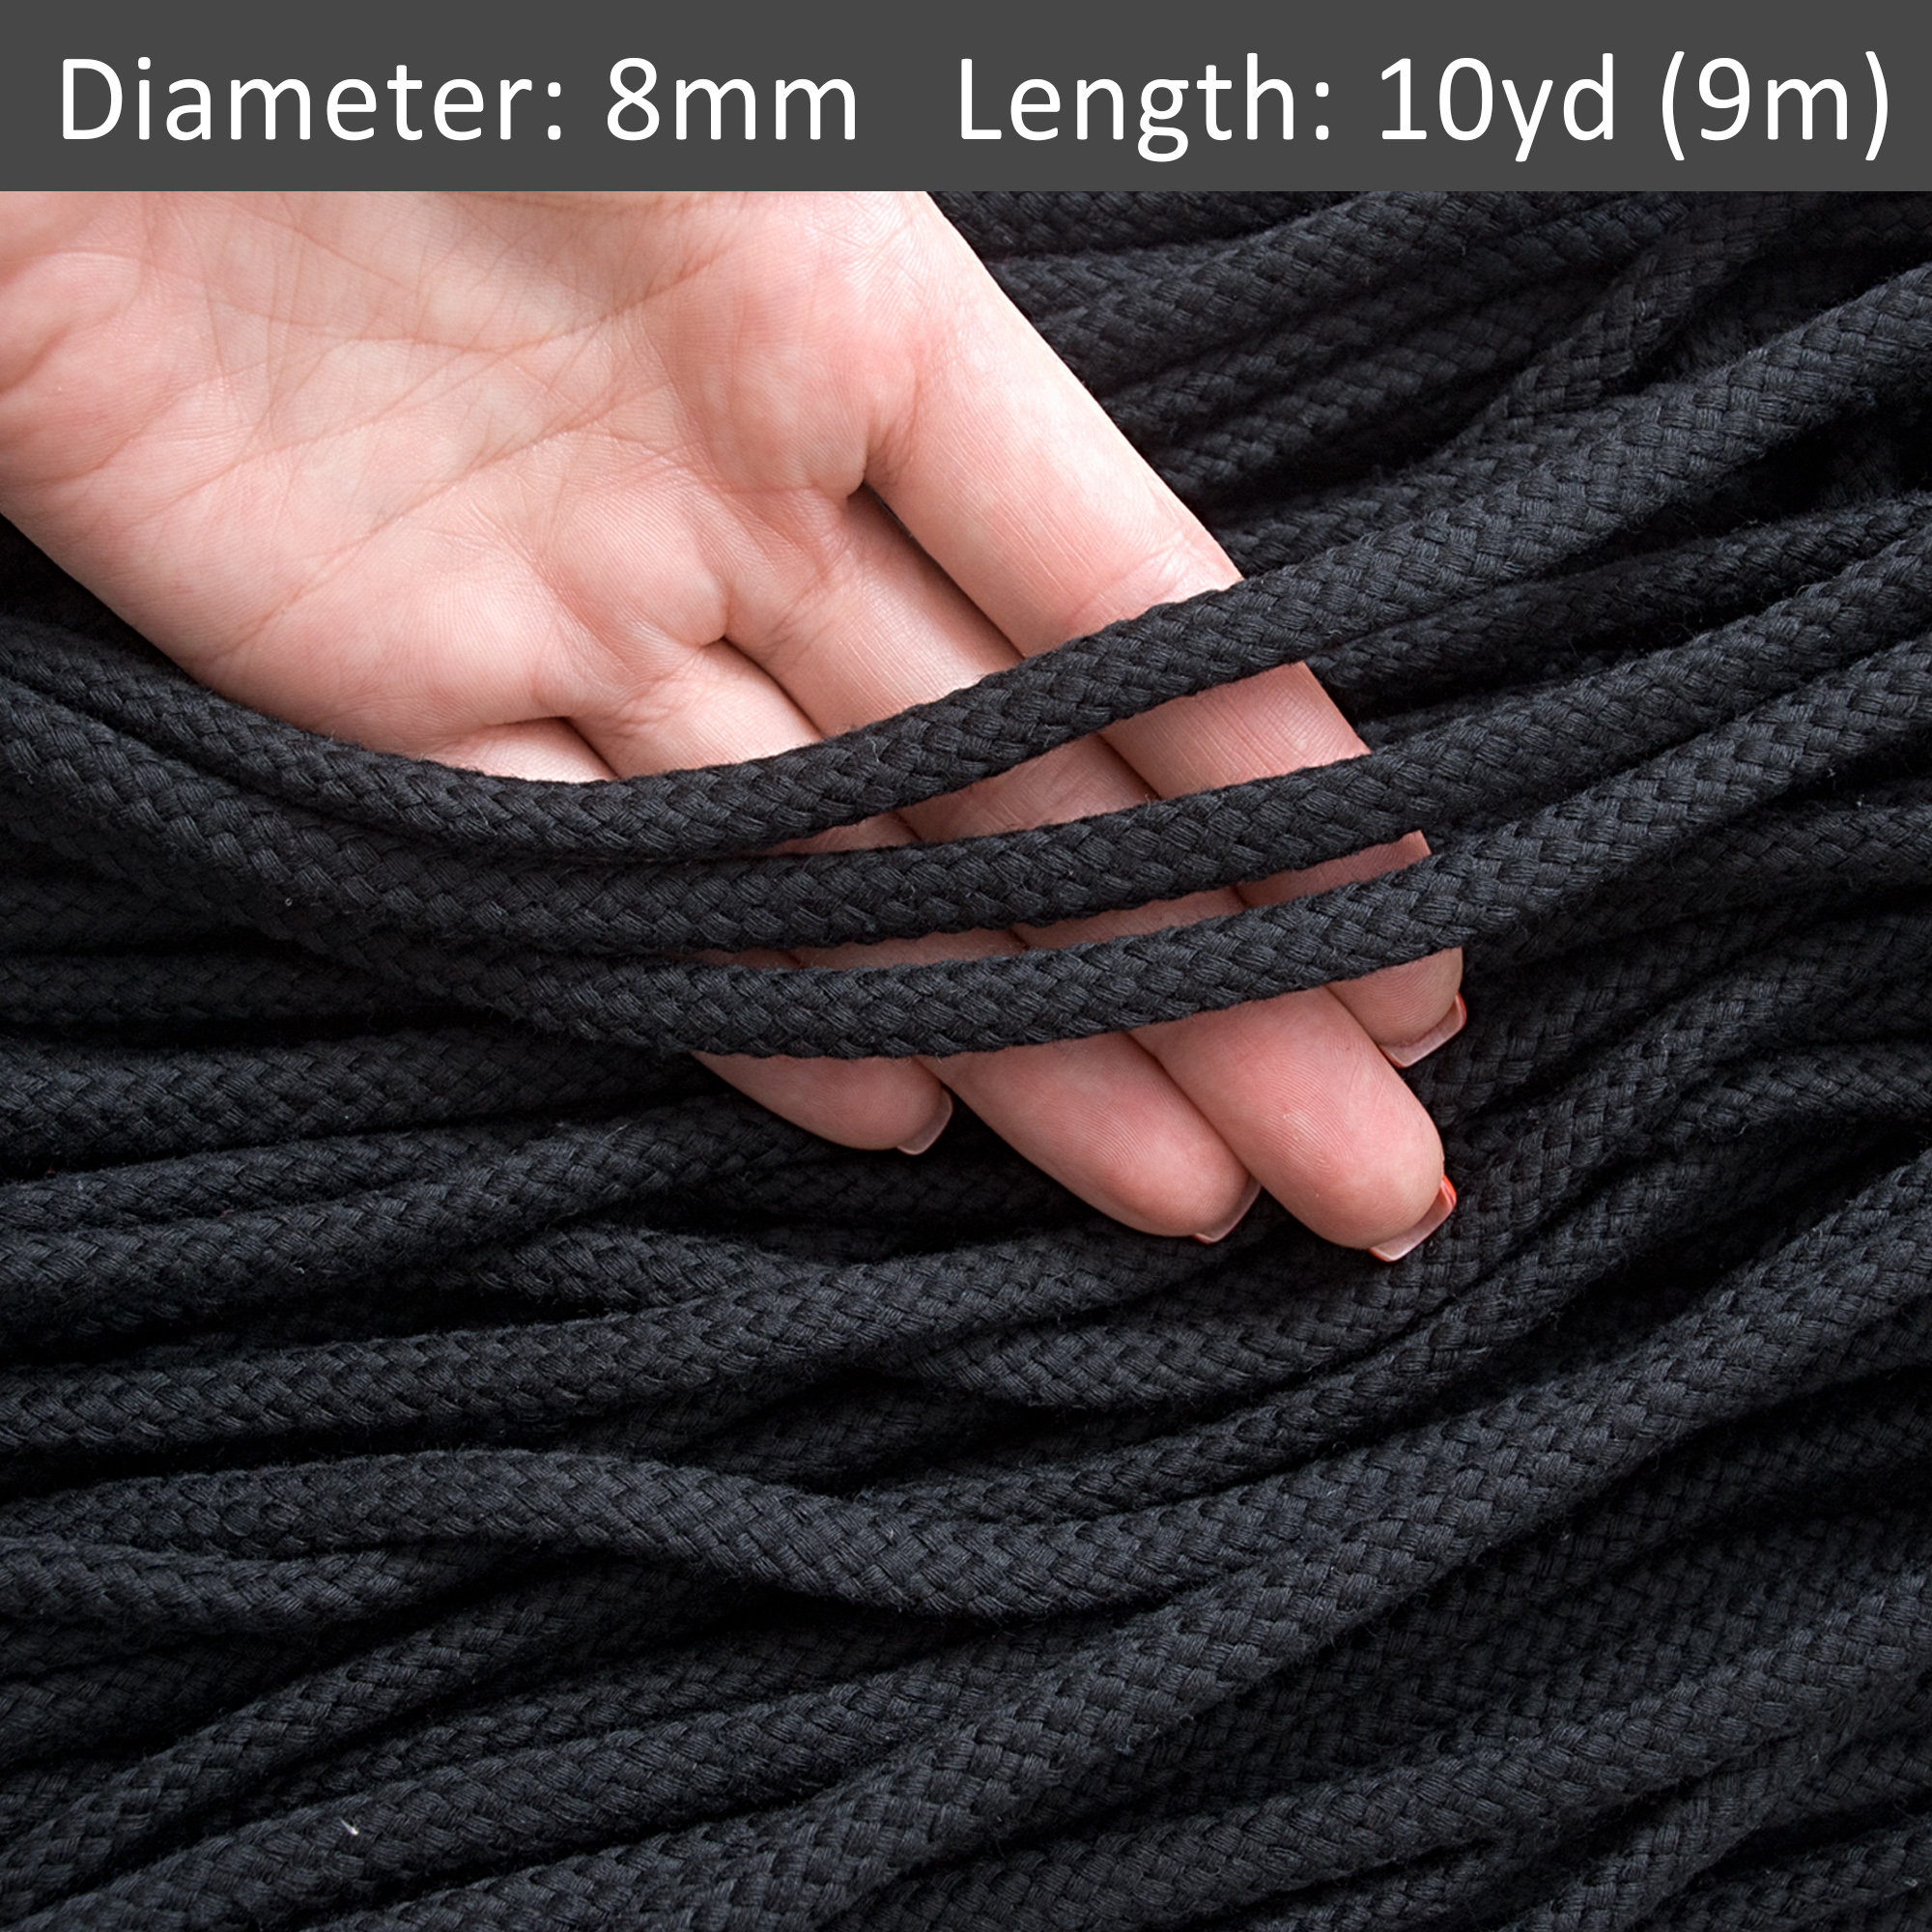 8mm Black Cotton Rope 30ft, Drawstring Rope, Braided Home Decor Cord,  Macrame Wall Art Cord, Cord for Crafting / 30ft 10yds 9m 